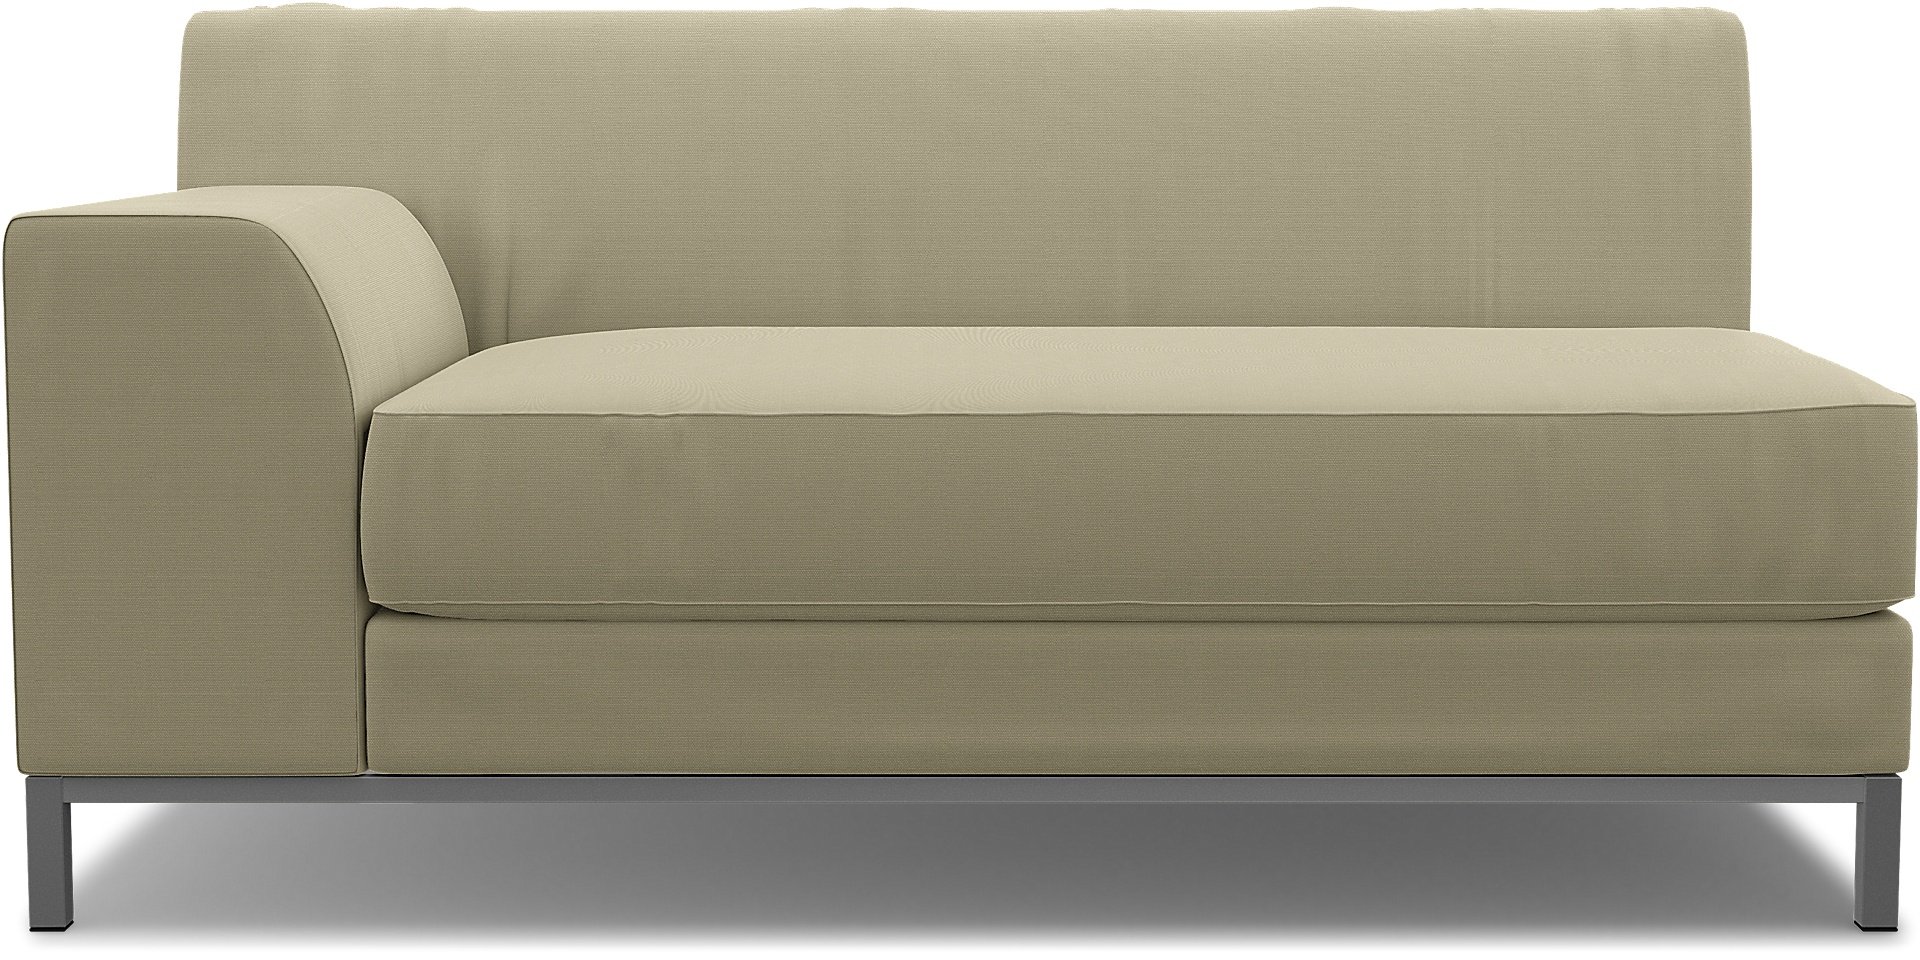 IKEA - Kramfors 2 Seater Sofa with Left Arm Cover, Sand Beige, Cotton - Bemz